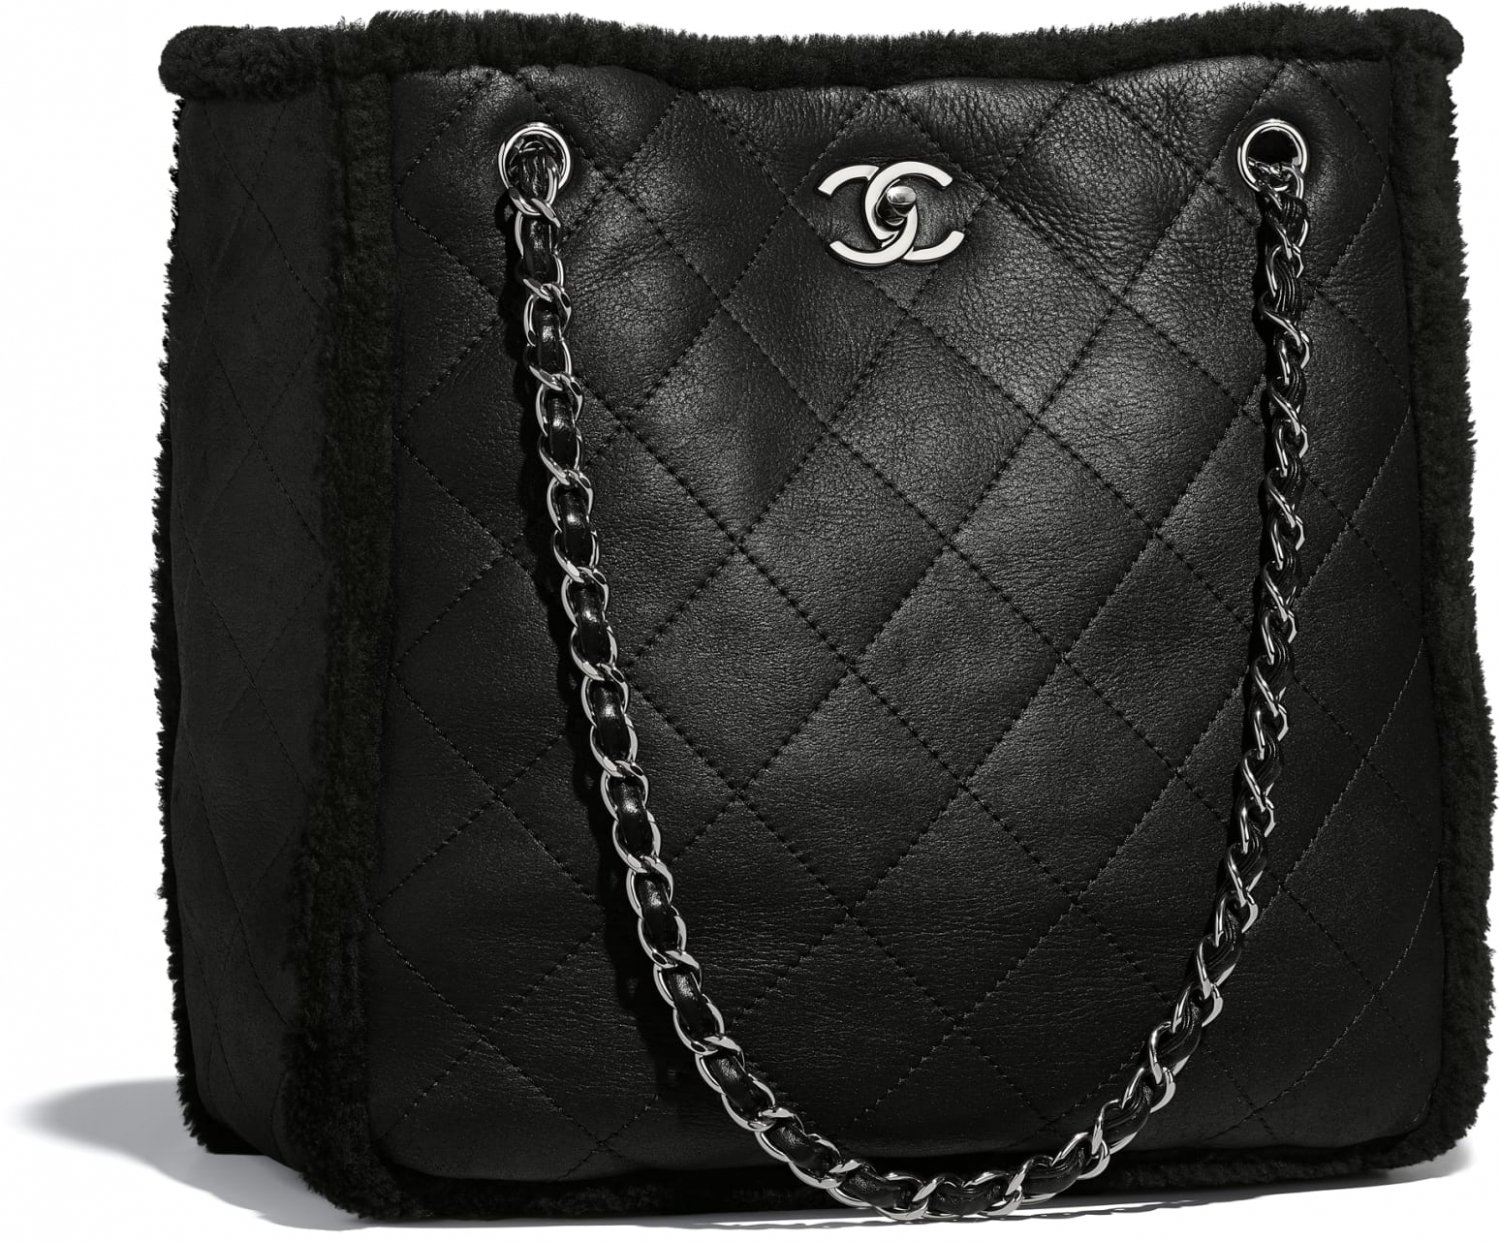 Chanel Large Shearling Coco Neige Shopping Bag